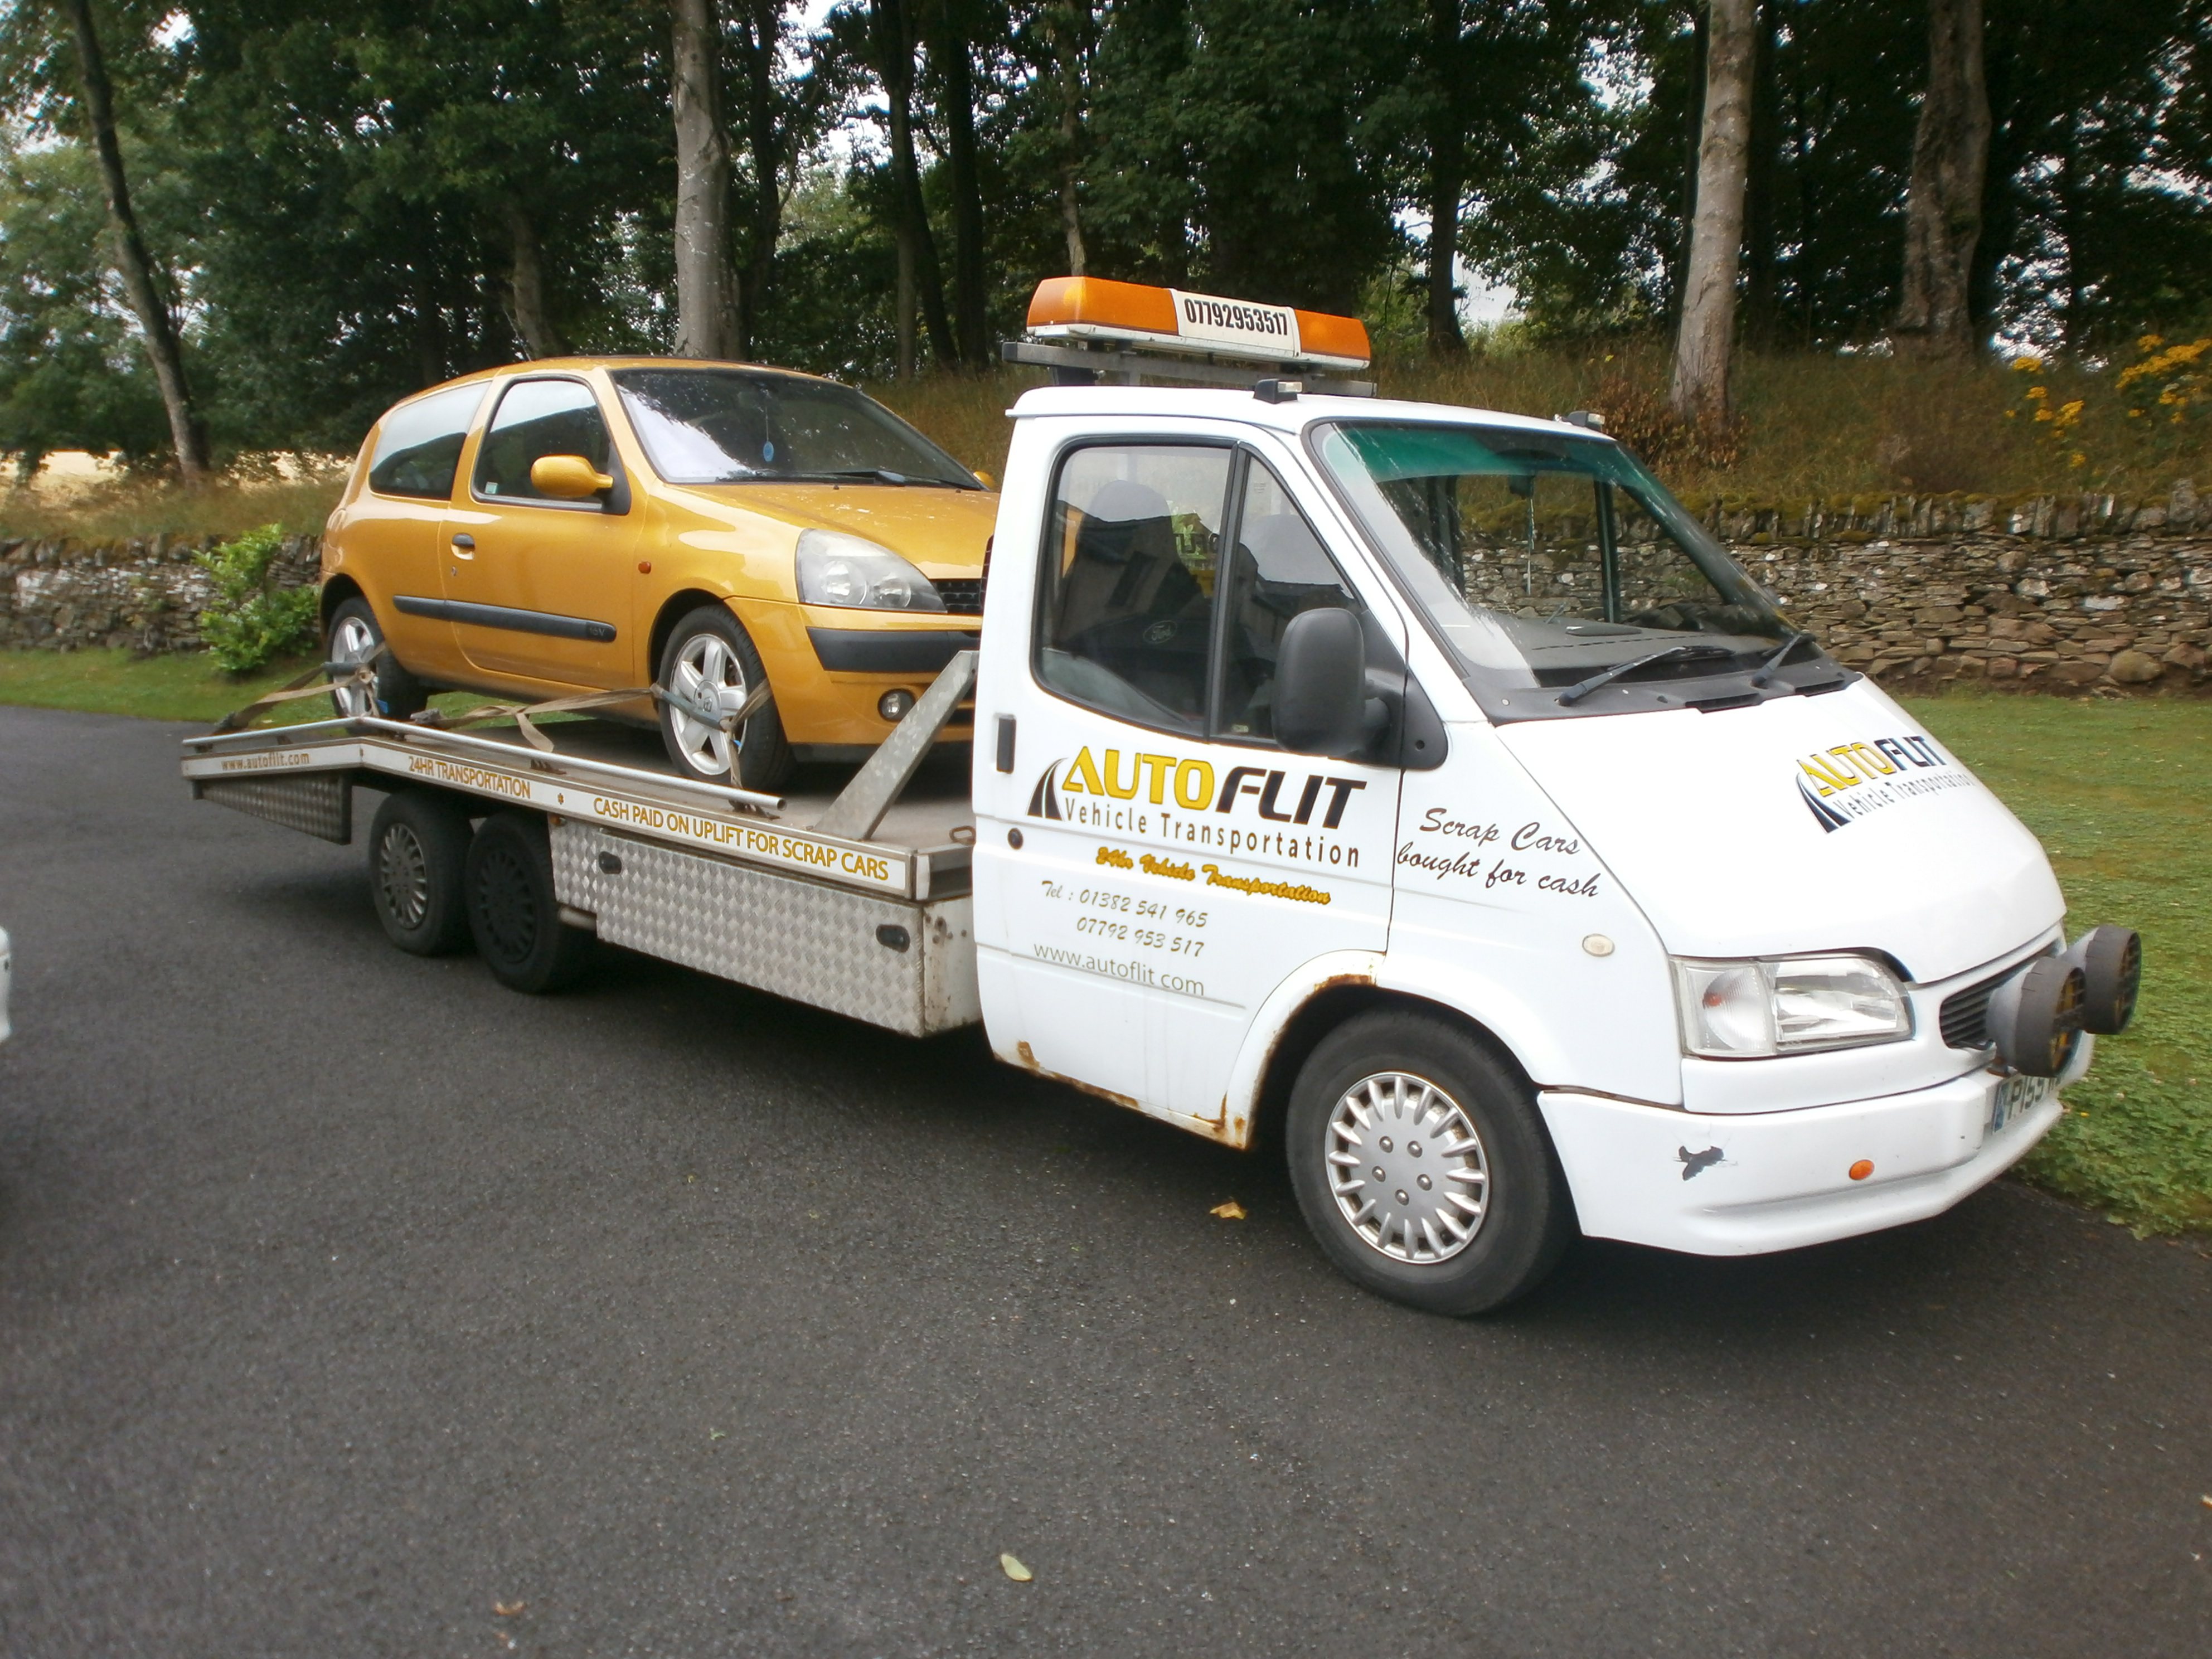 Renault Clio on the back of the Autoflit transporter